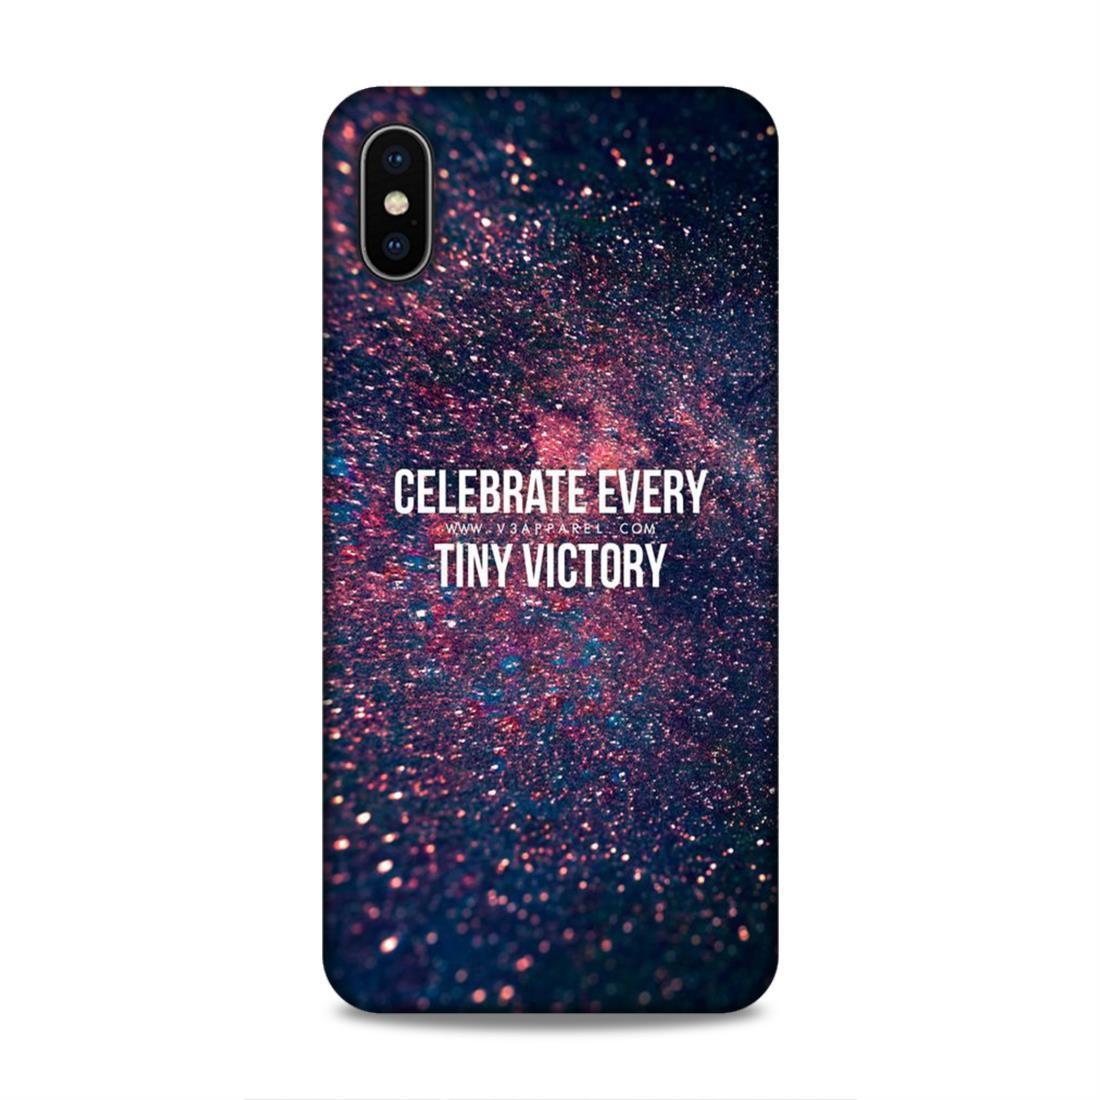 Celebrate Tiny Victory iPhone XS Max Mobile Cover